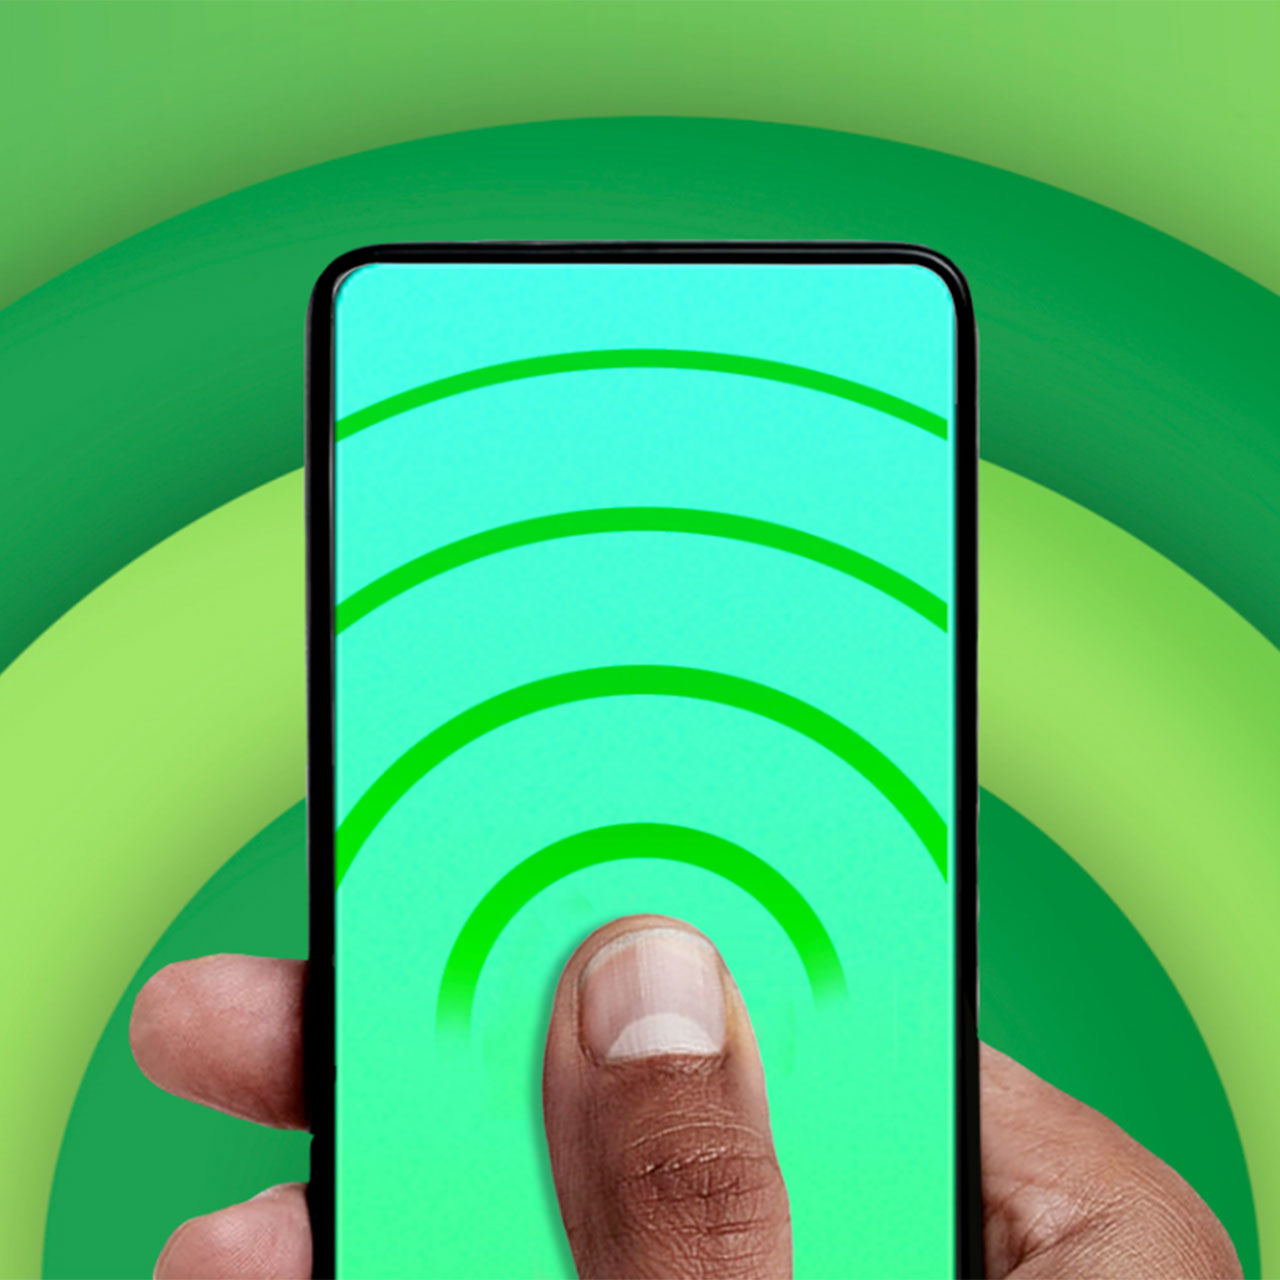 TAPT on a smartphone. Phone is on a green field with radial gradients in the background.